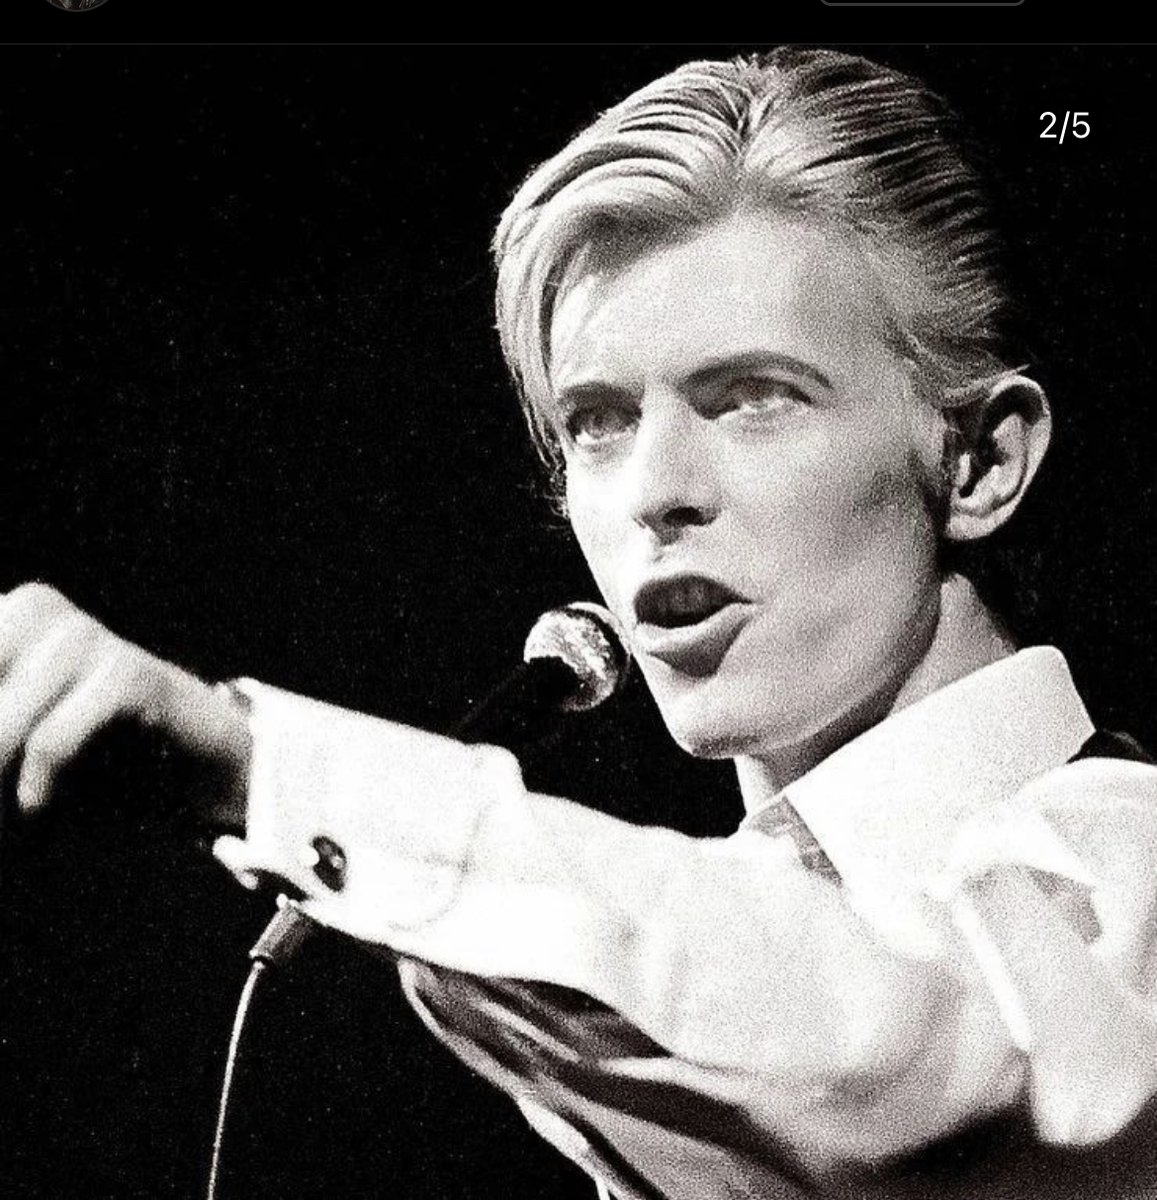 I'm in the mood for your love
For your love
For your love
For your love - oh

What In The World
David Bowie 1976
#BowieForever